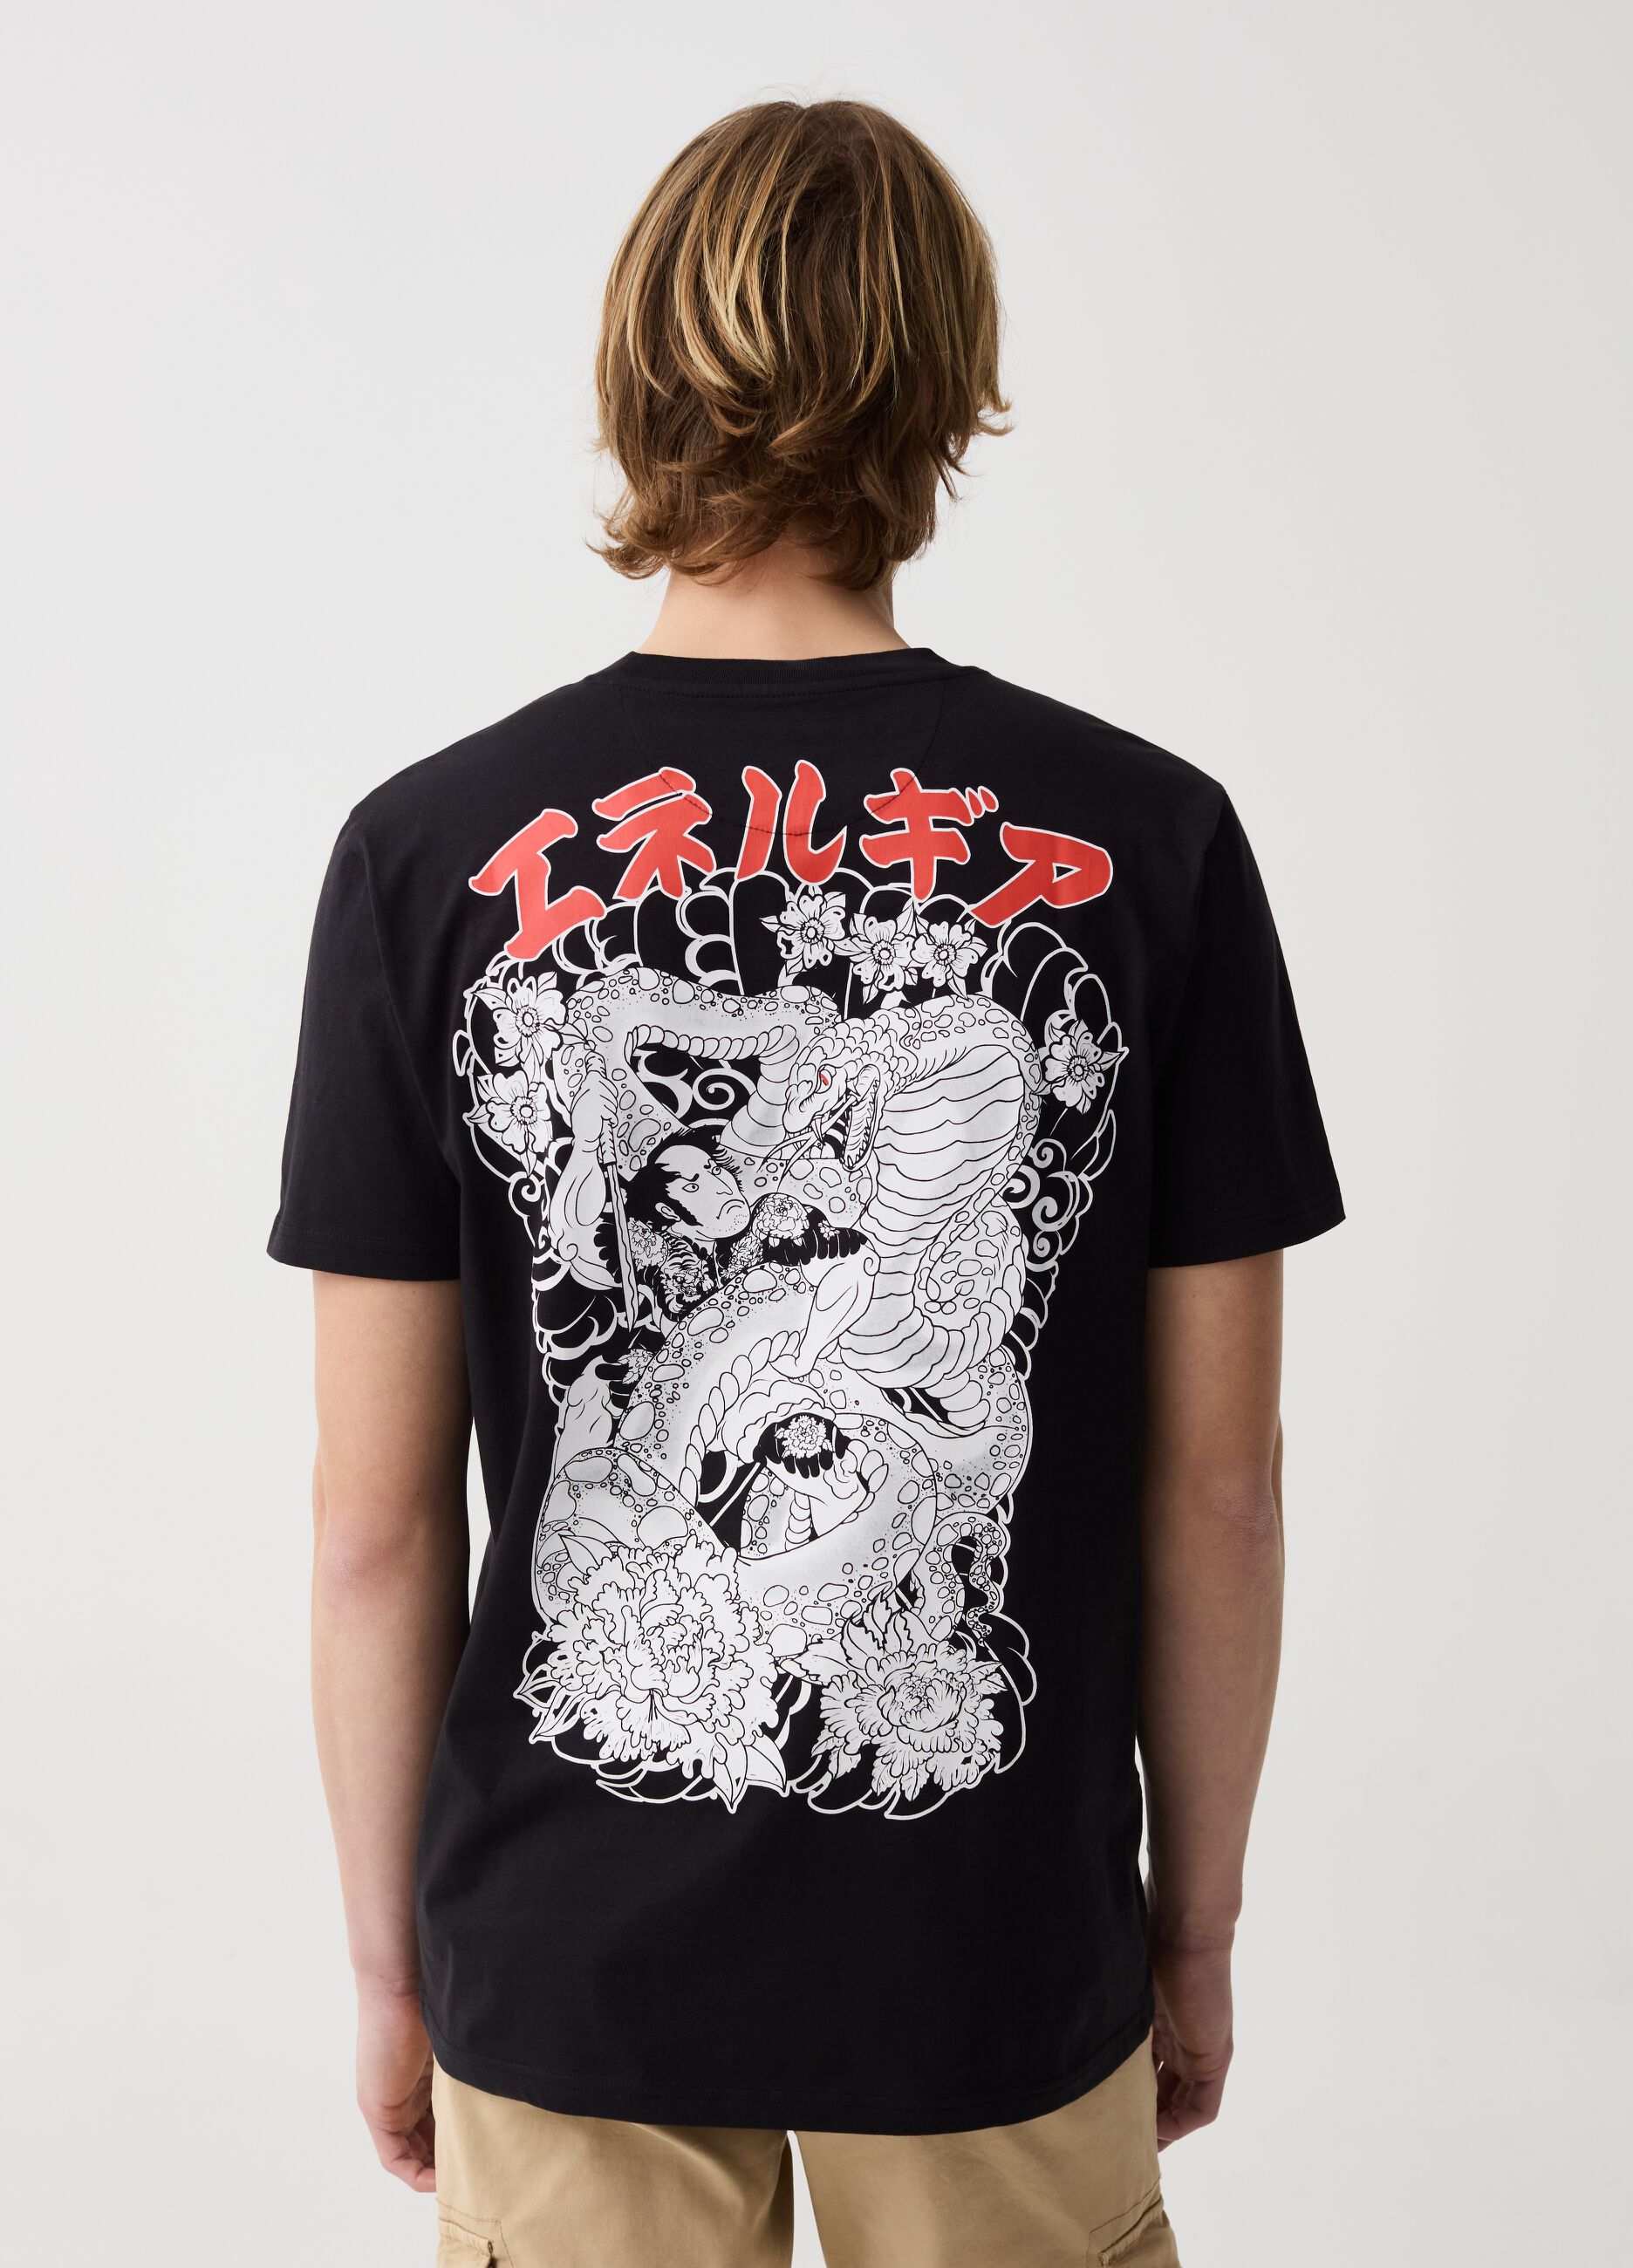 Cotton T-shirt with Japanese print